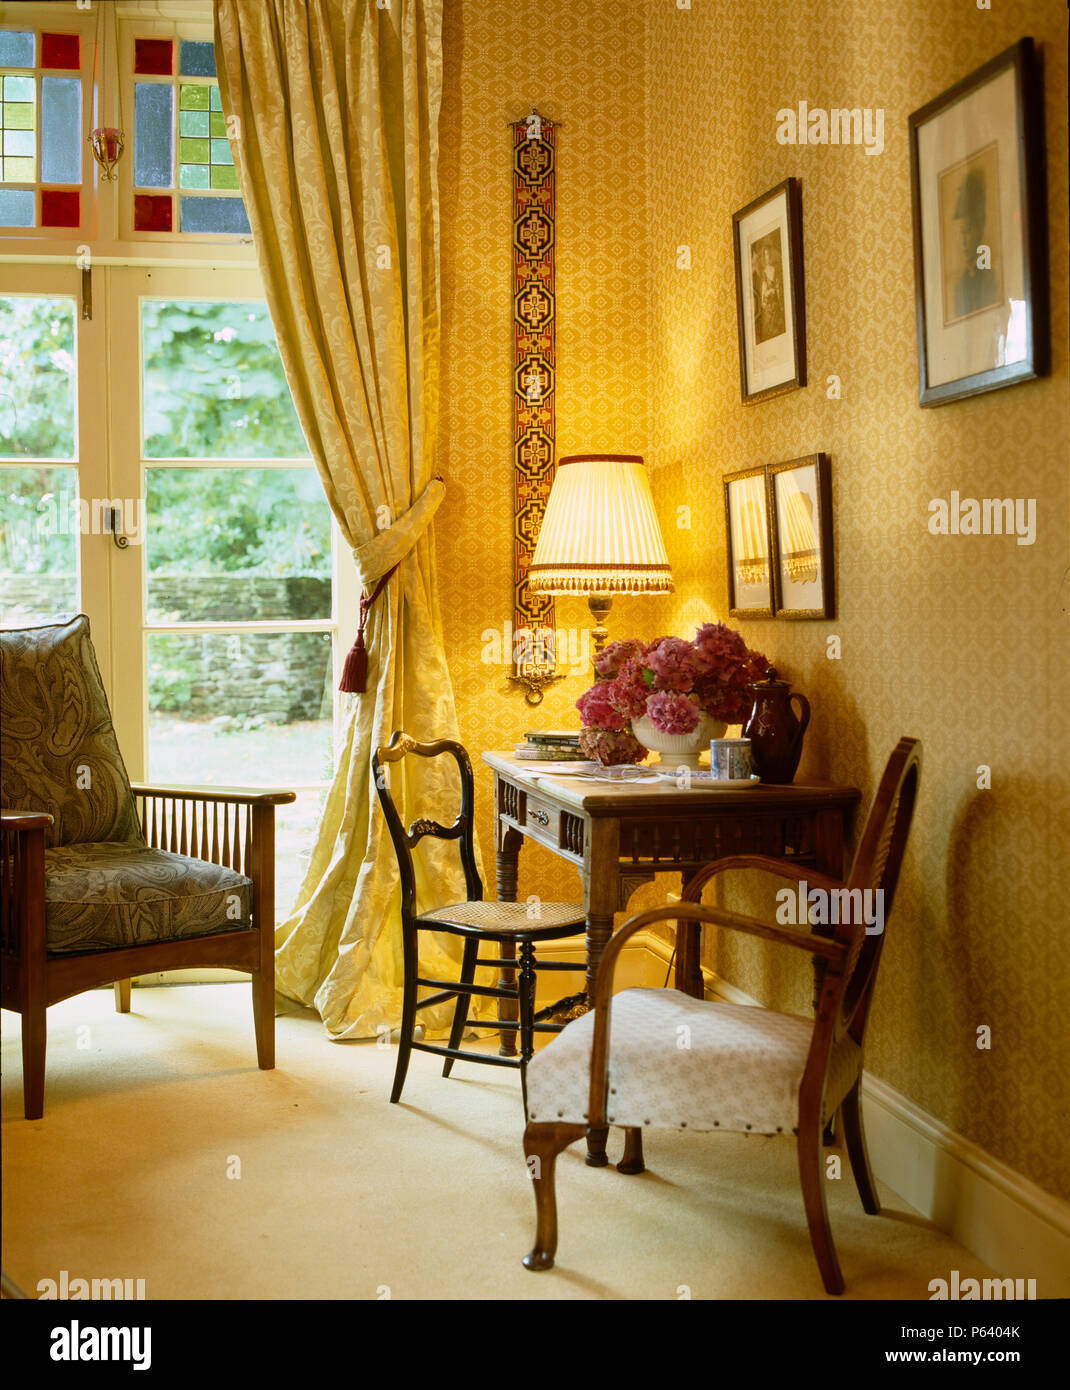 Corner of wallpapered room with brocade curtains and french windows to outside. Stock Photo